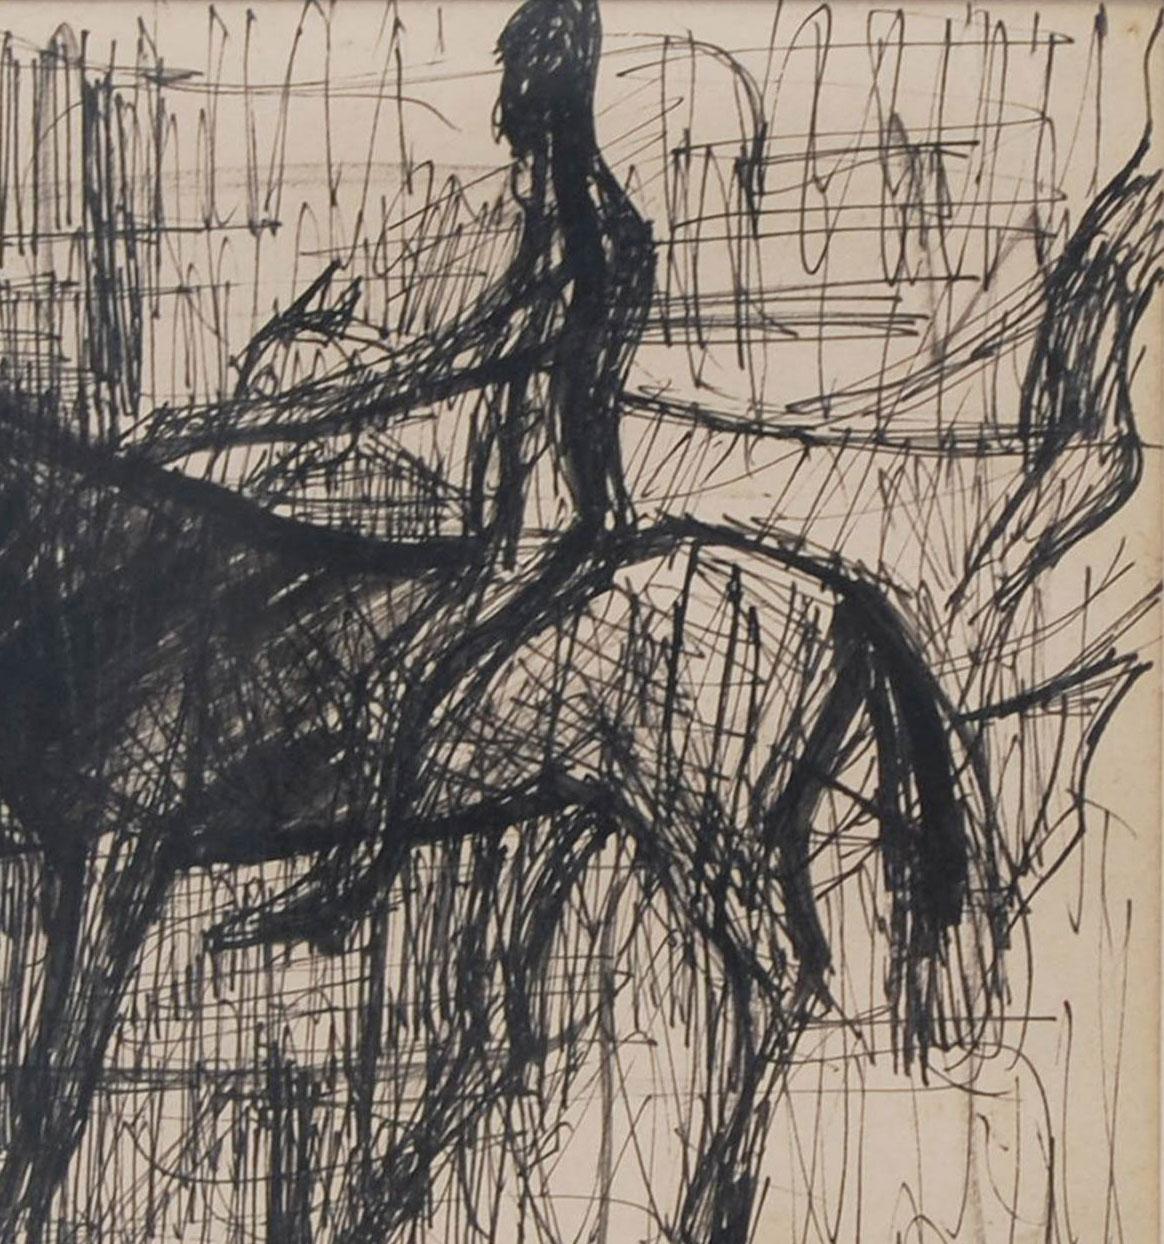 Sunil Das - Untitled - 8.5 x 7 inches (unframed size)
Ink on paper
Inclusive of shipment in ready to hang form.

Sunil Das was one of India's most important postmodernist painters and rose to prominence through his drawings of horses. He captured